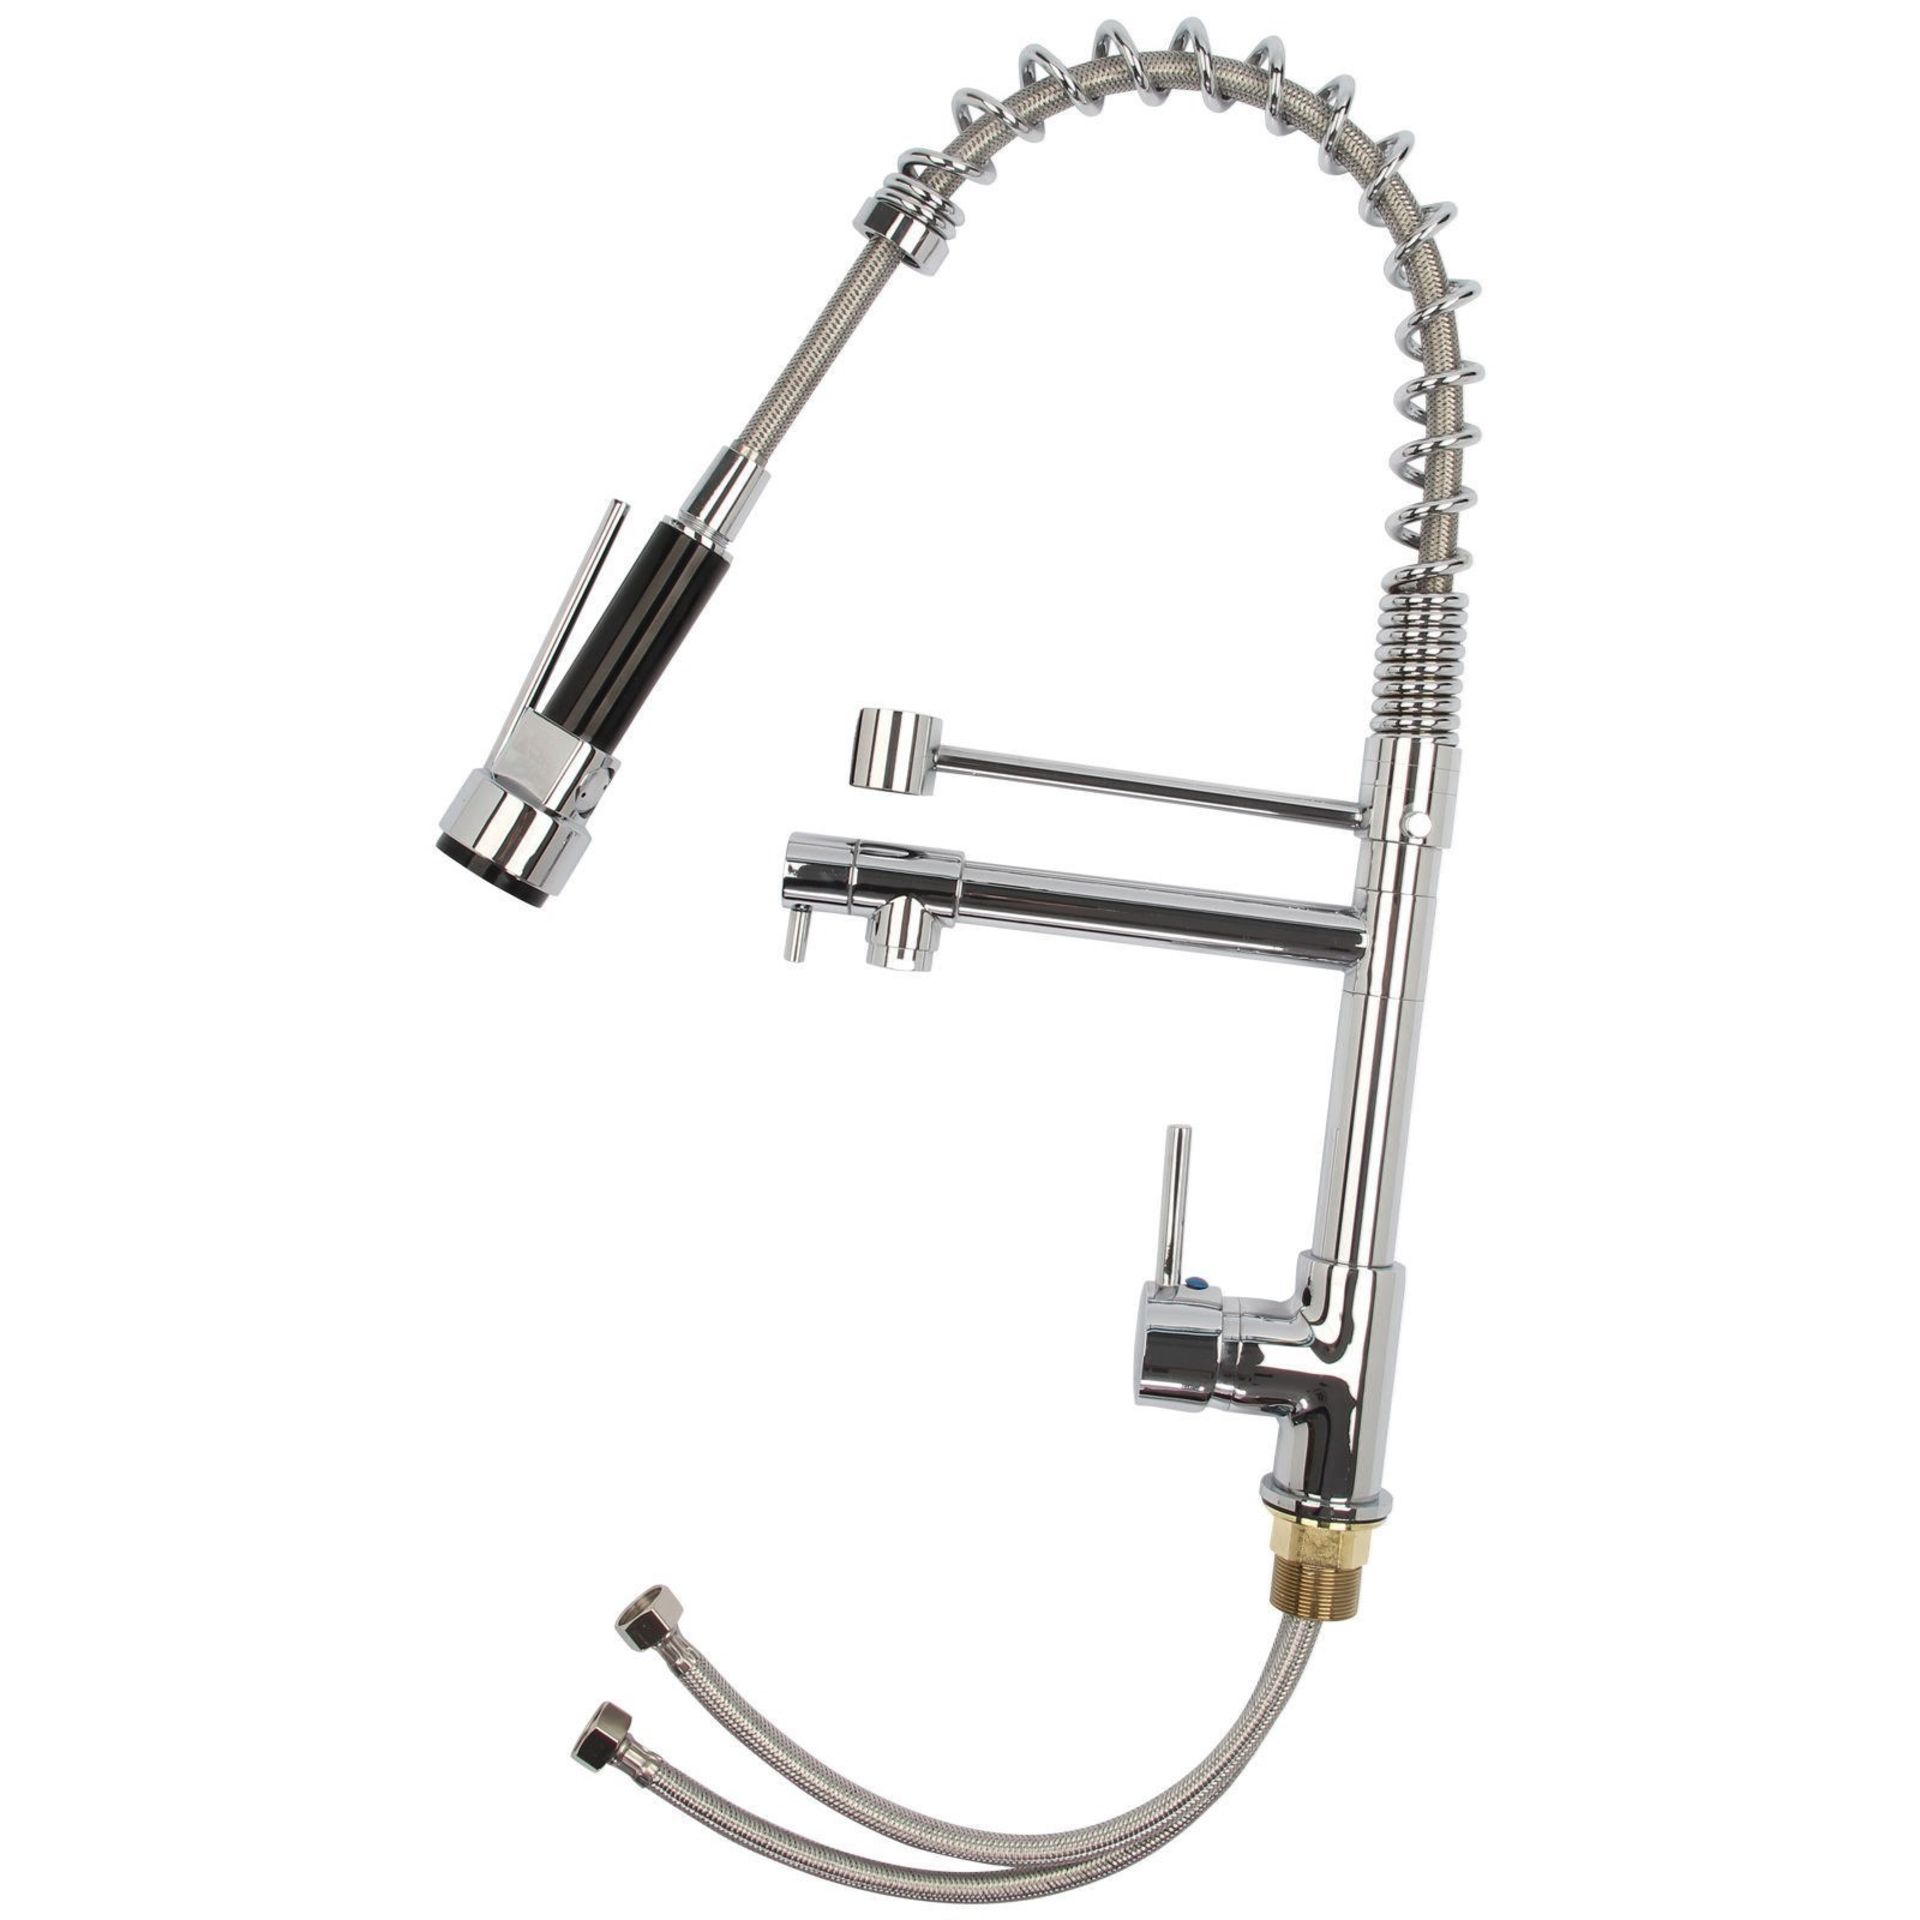 Bentley Modern Monobloc Chrome Brass Pull Out Spray Mixer Tap. RRP £349.99.This tap is from ... - Image 4 of 4